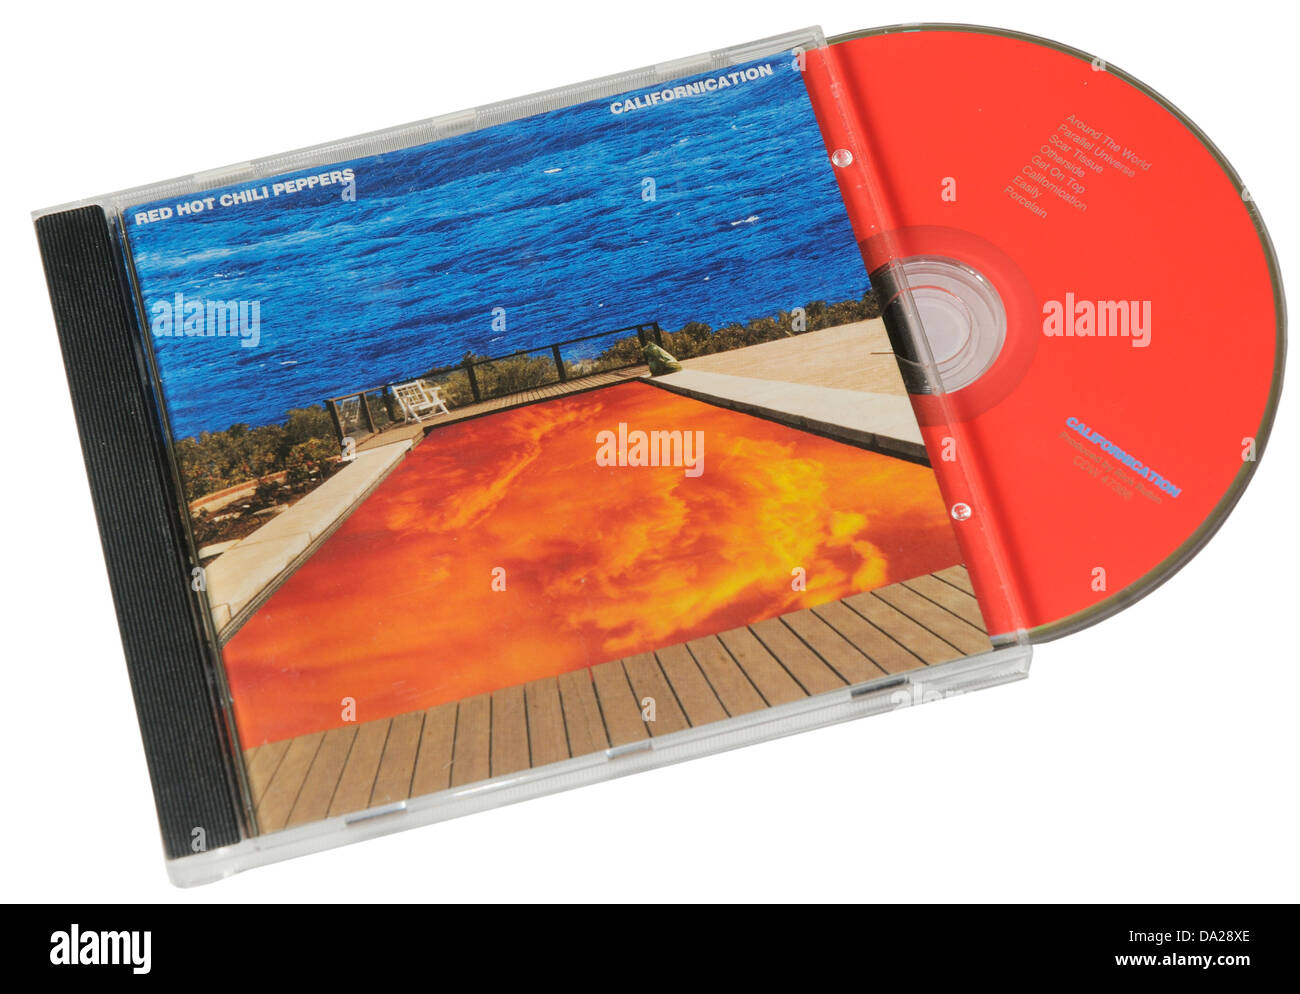 Red Hot Chilli Peppers Californication album on CD Stock Photo - Alamy